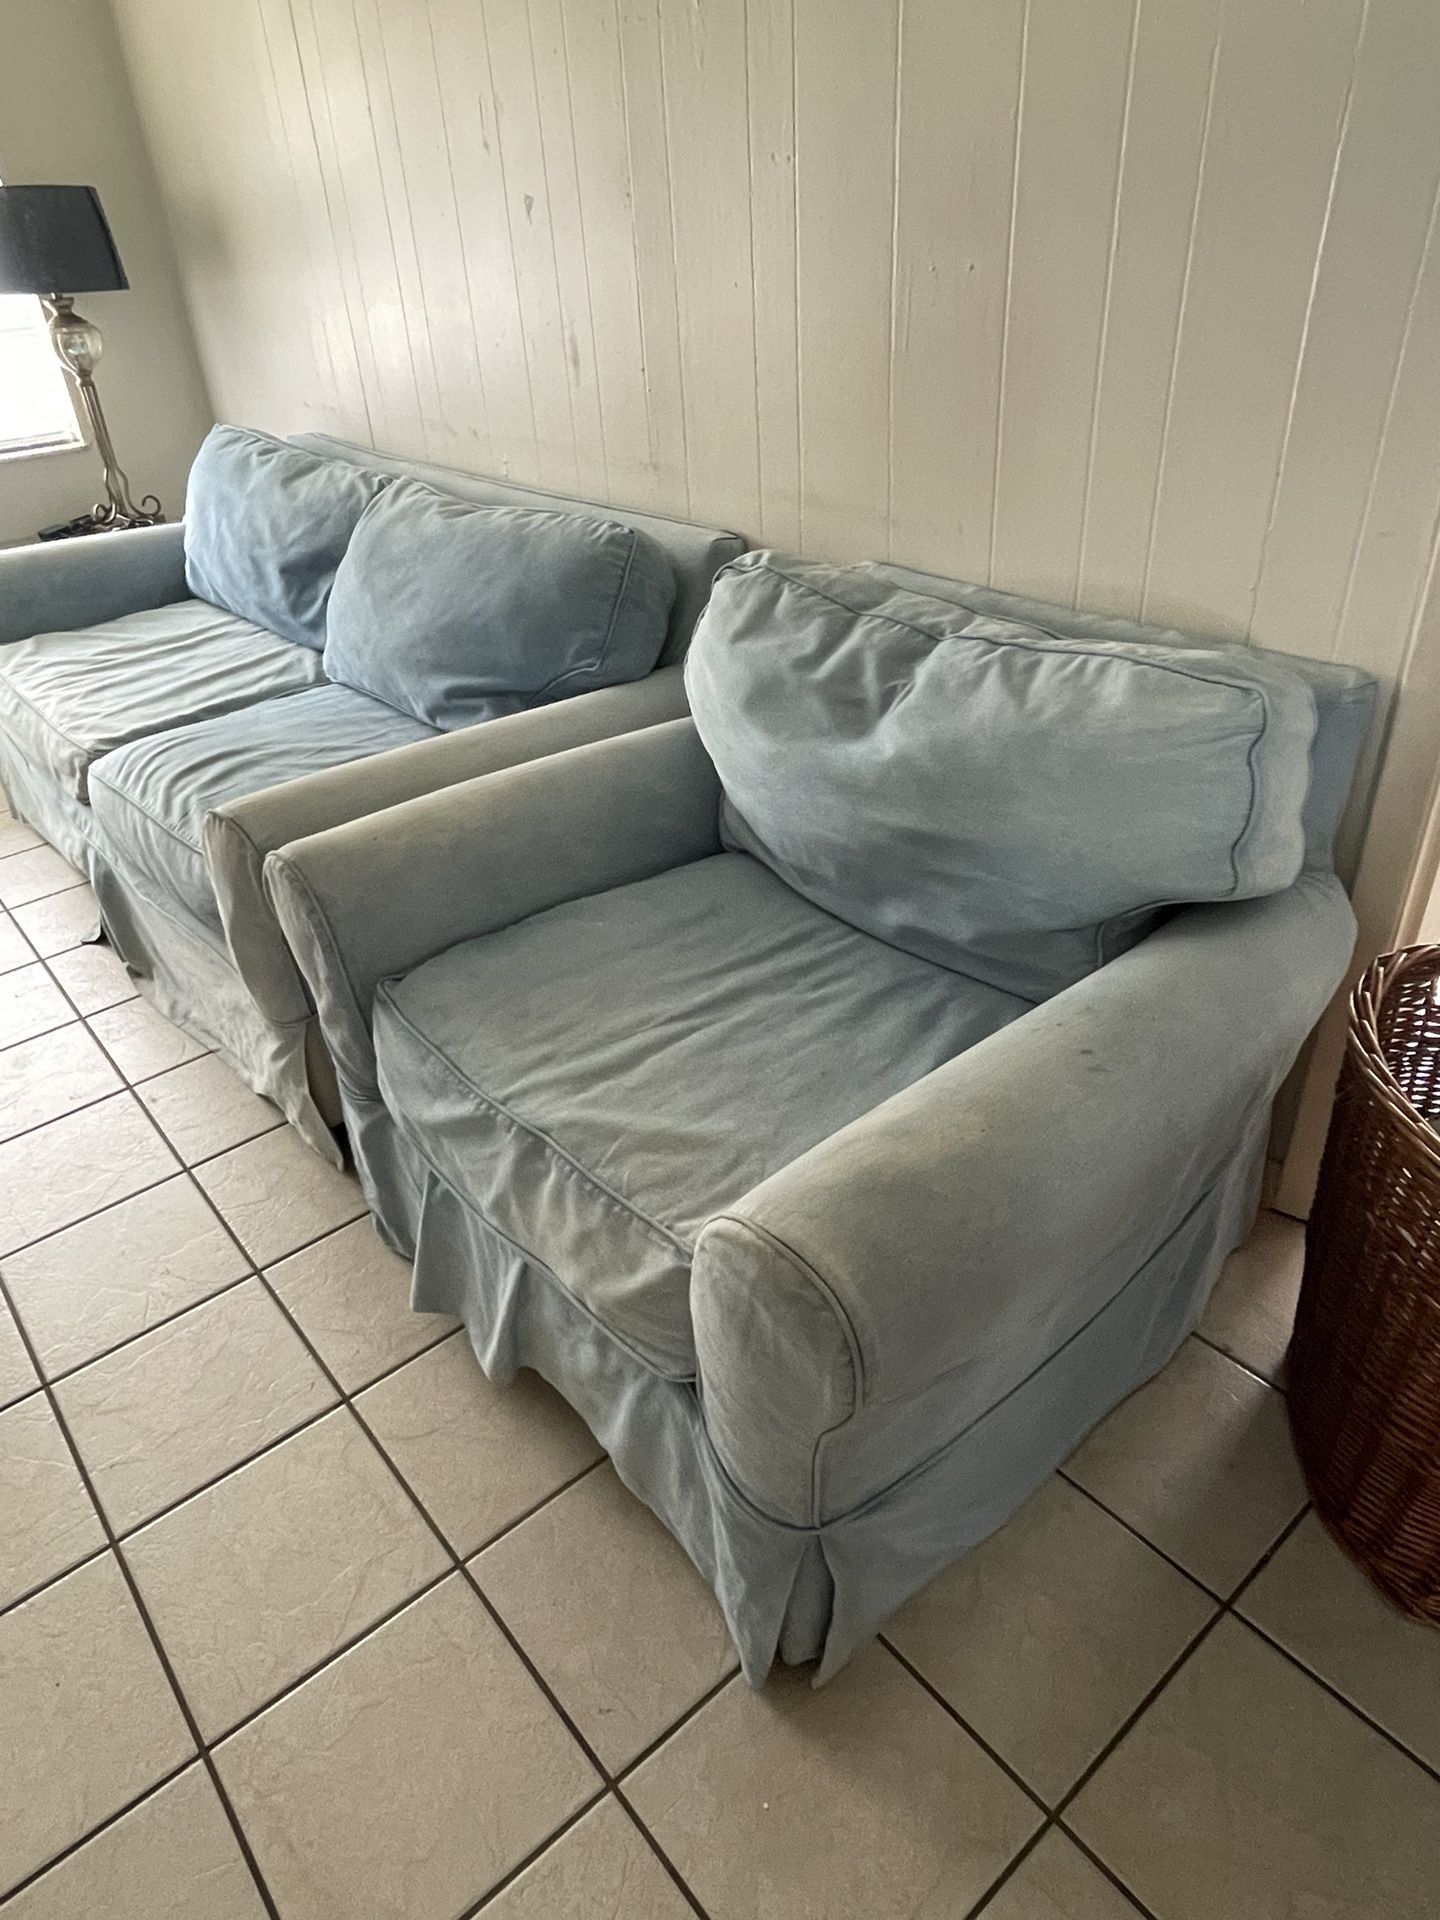 Denim Couch And Chair 